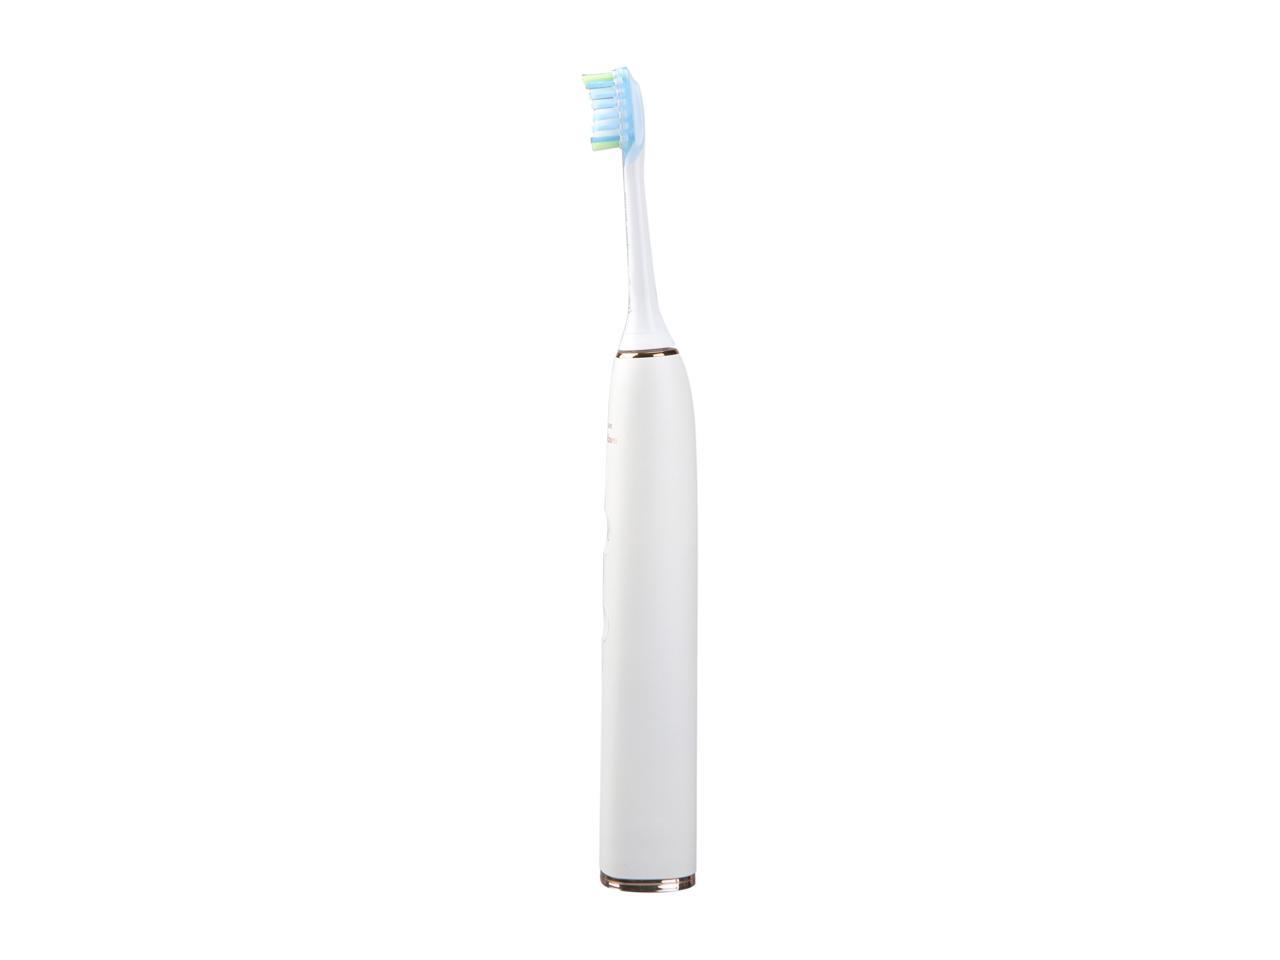 Sonicare HX9924/61 DiamondClean Smart 9500 Series Sonic Electric Toothbrush with Bluetooth and App, Rose Gold